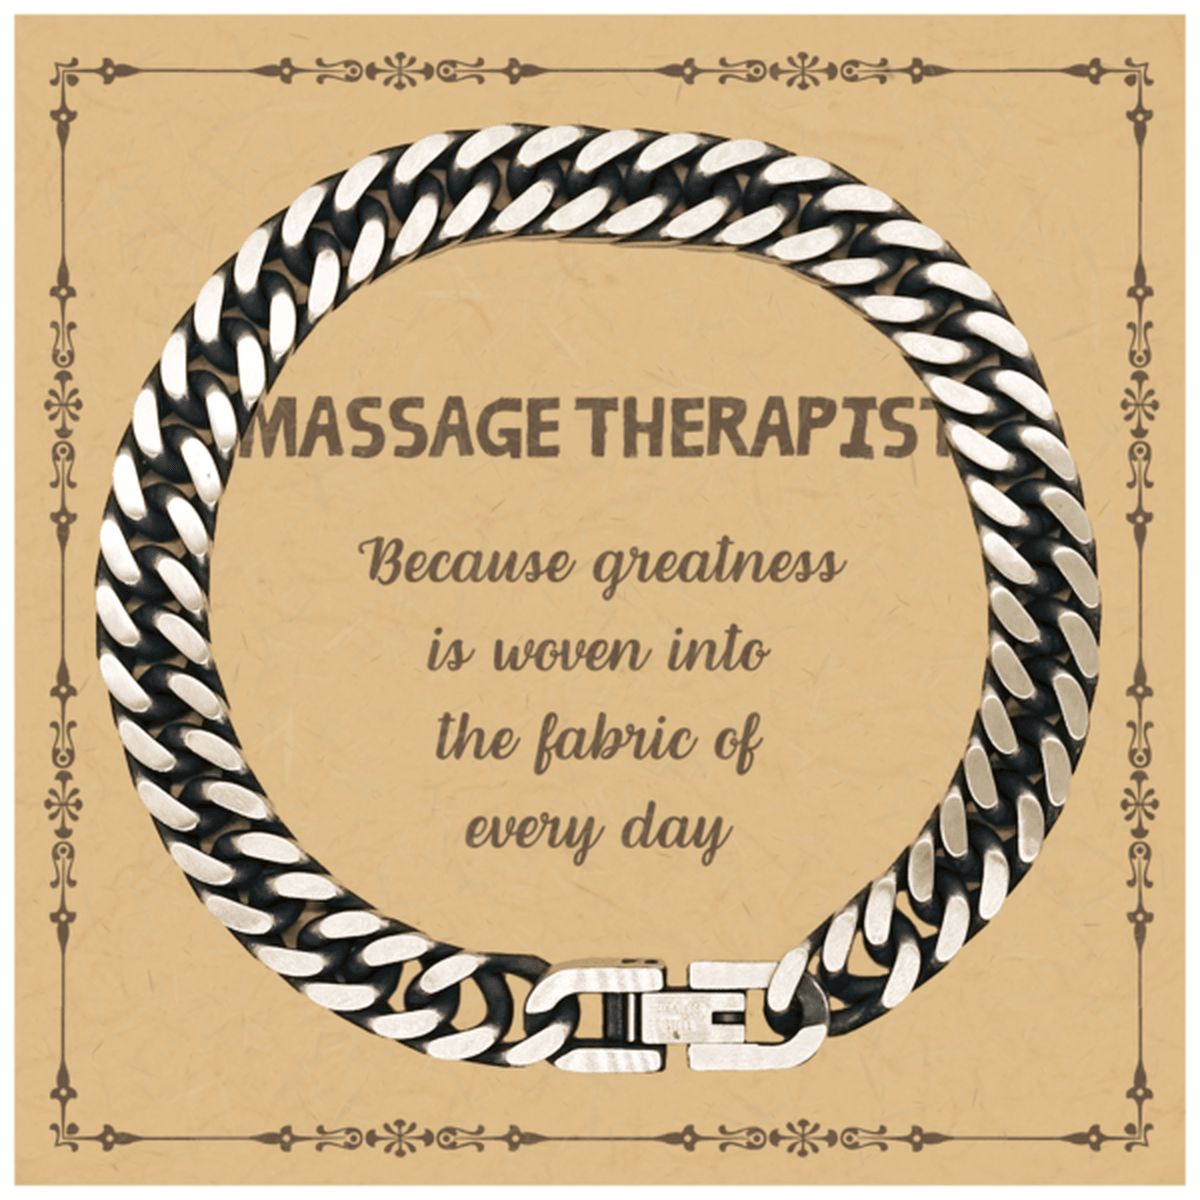 Sarcastic Massage Therapist Cuban Link Chain Bracelet Gifts, Christmas Holiday Gifts for Massage Therapist Birthday Message Card, Massage Therapist: Because greatness is woven into the fabric of every day, Coworkers, Friends - Mallard Moon Gift Shop